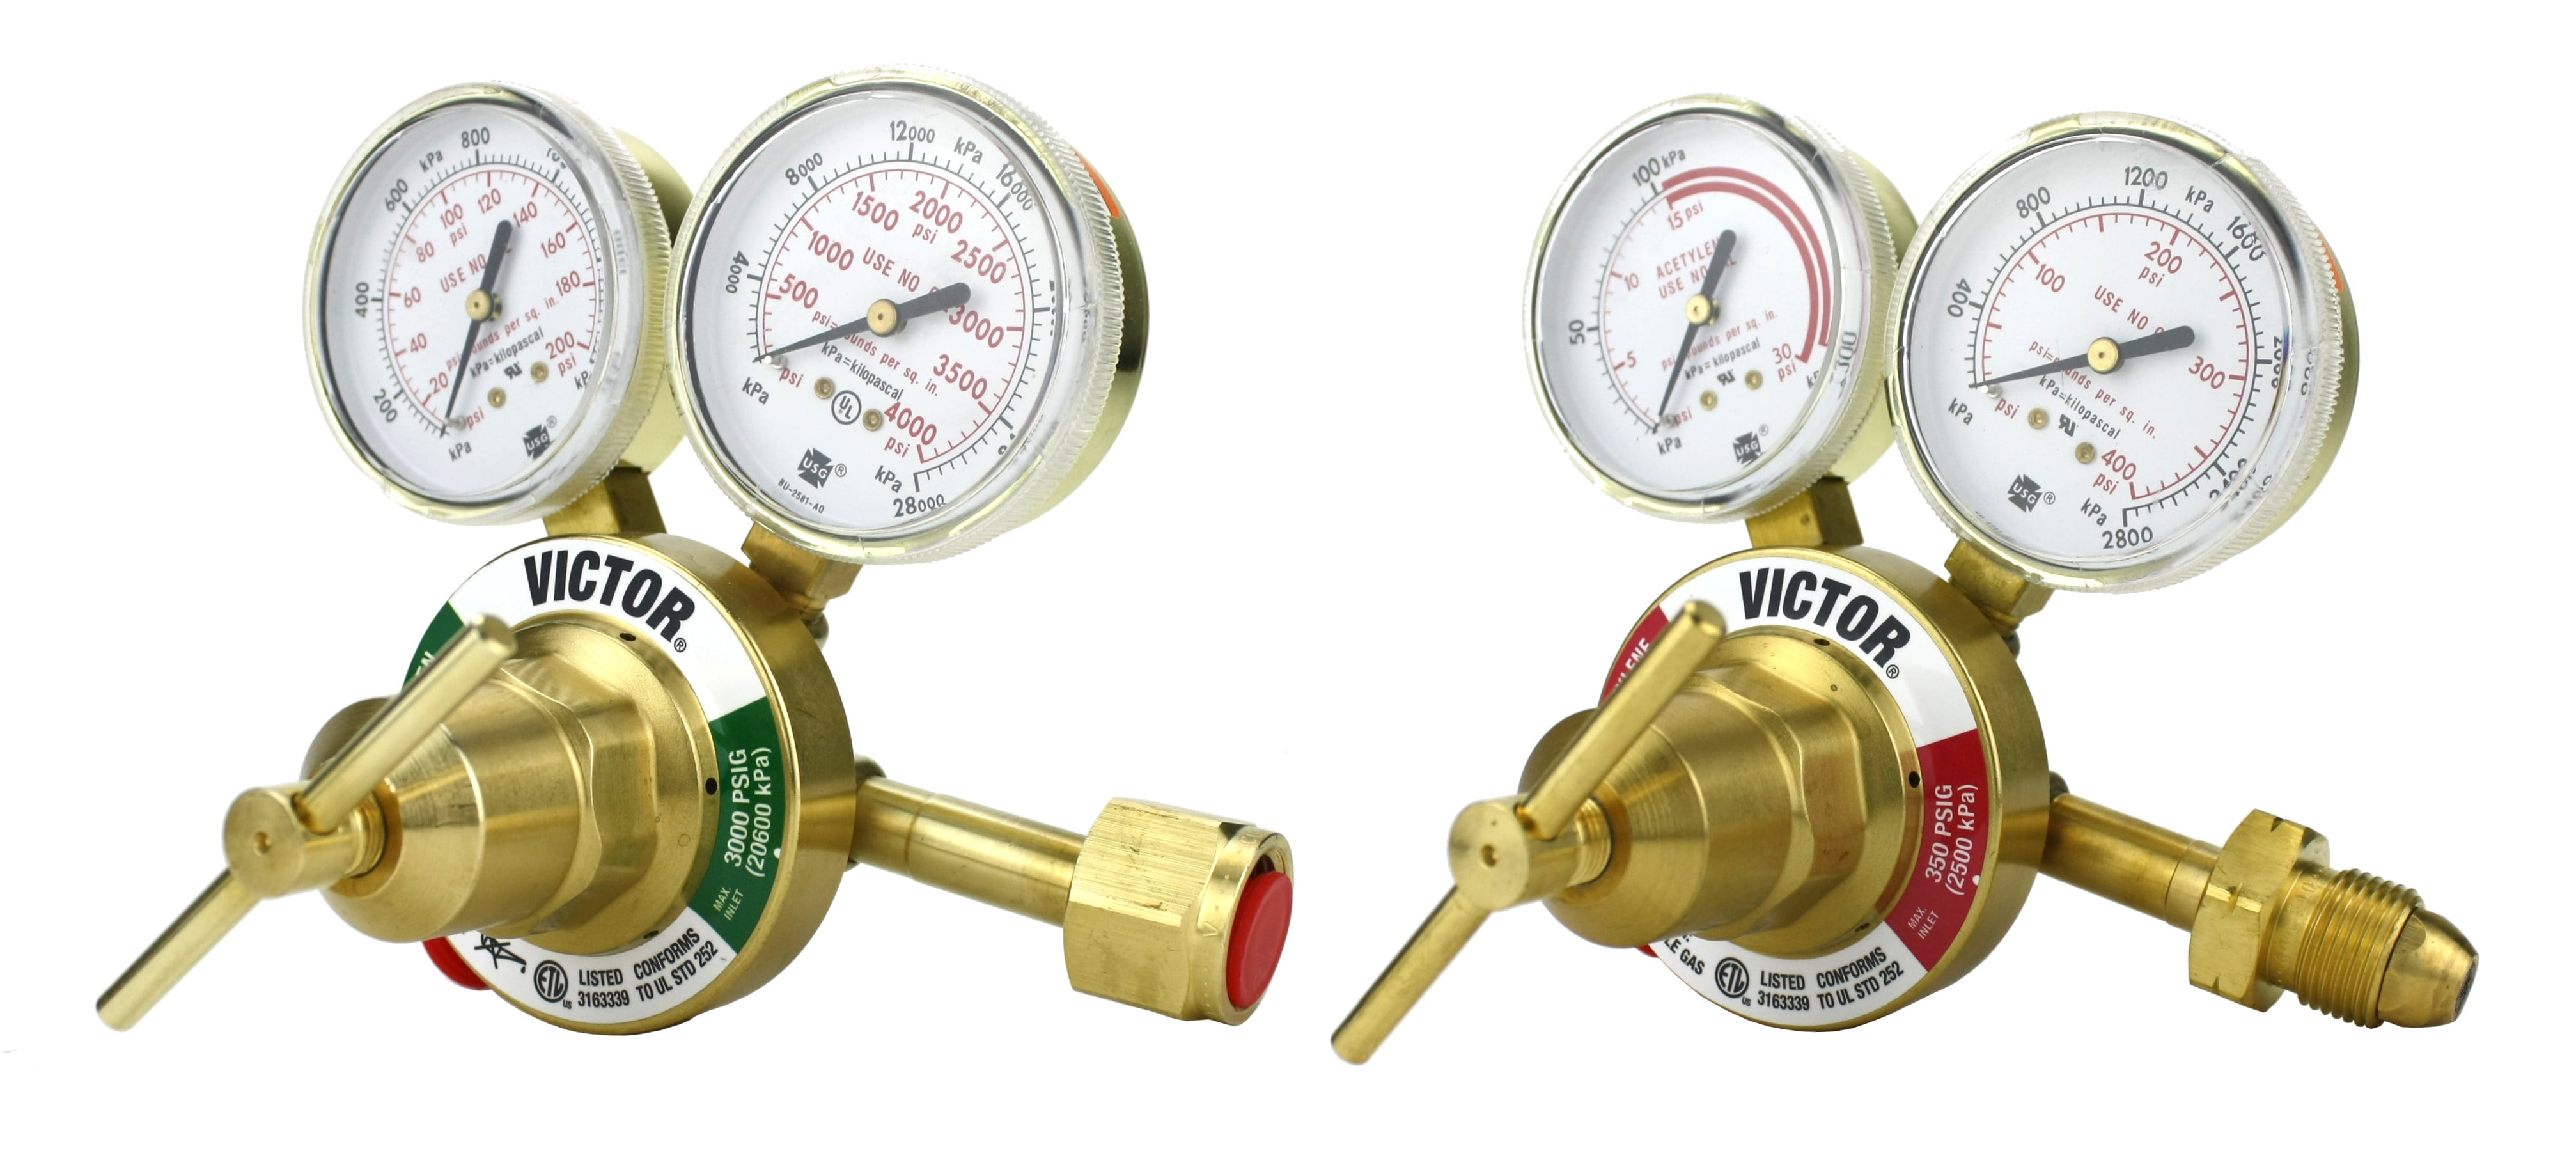 Genuine Victor Delivery Rate: 2-15 psi CGA-510 VICTOR Heavy Duty Acetylene Model: 350-15-510 Full Brass 